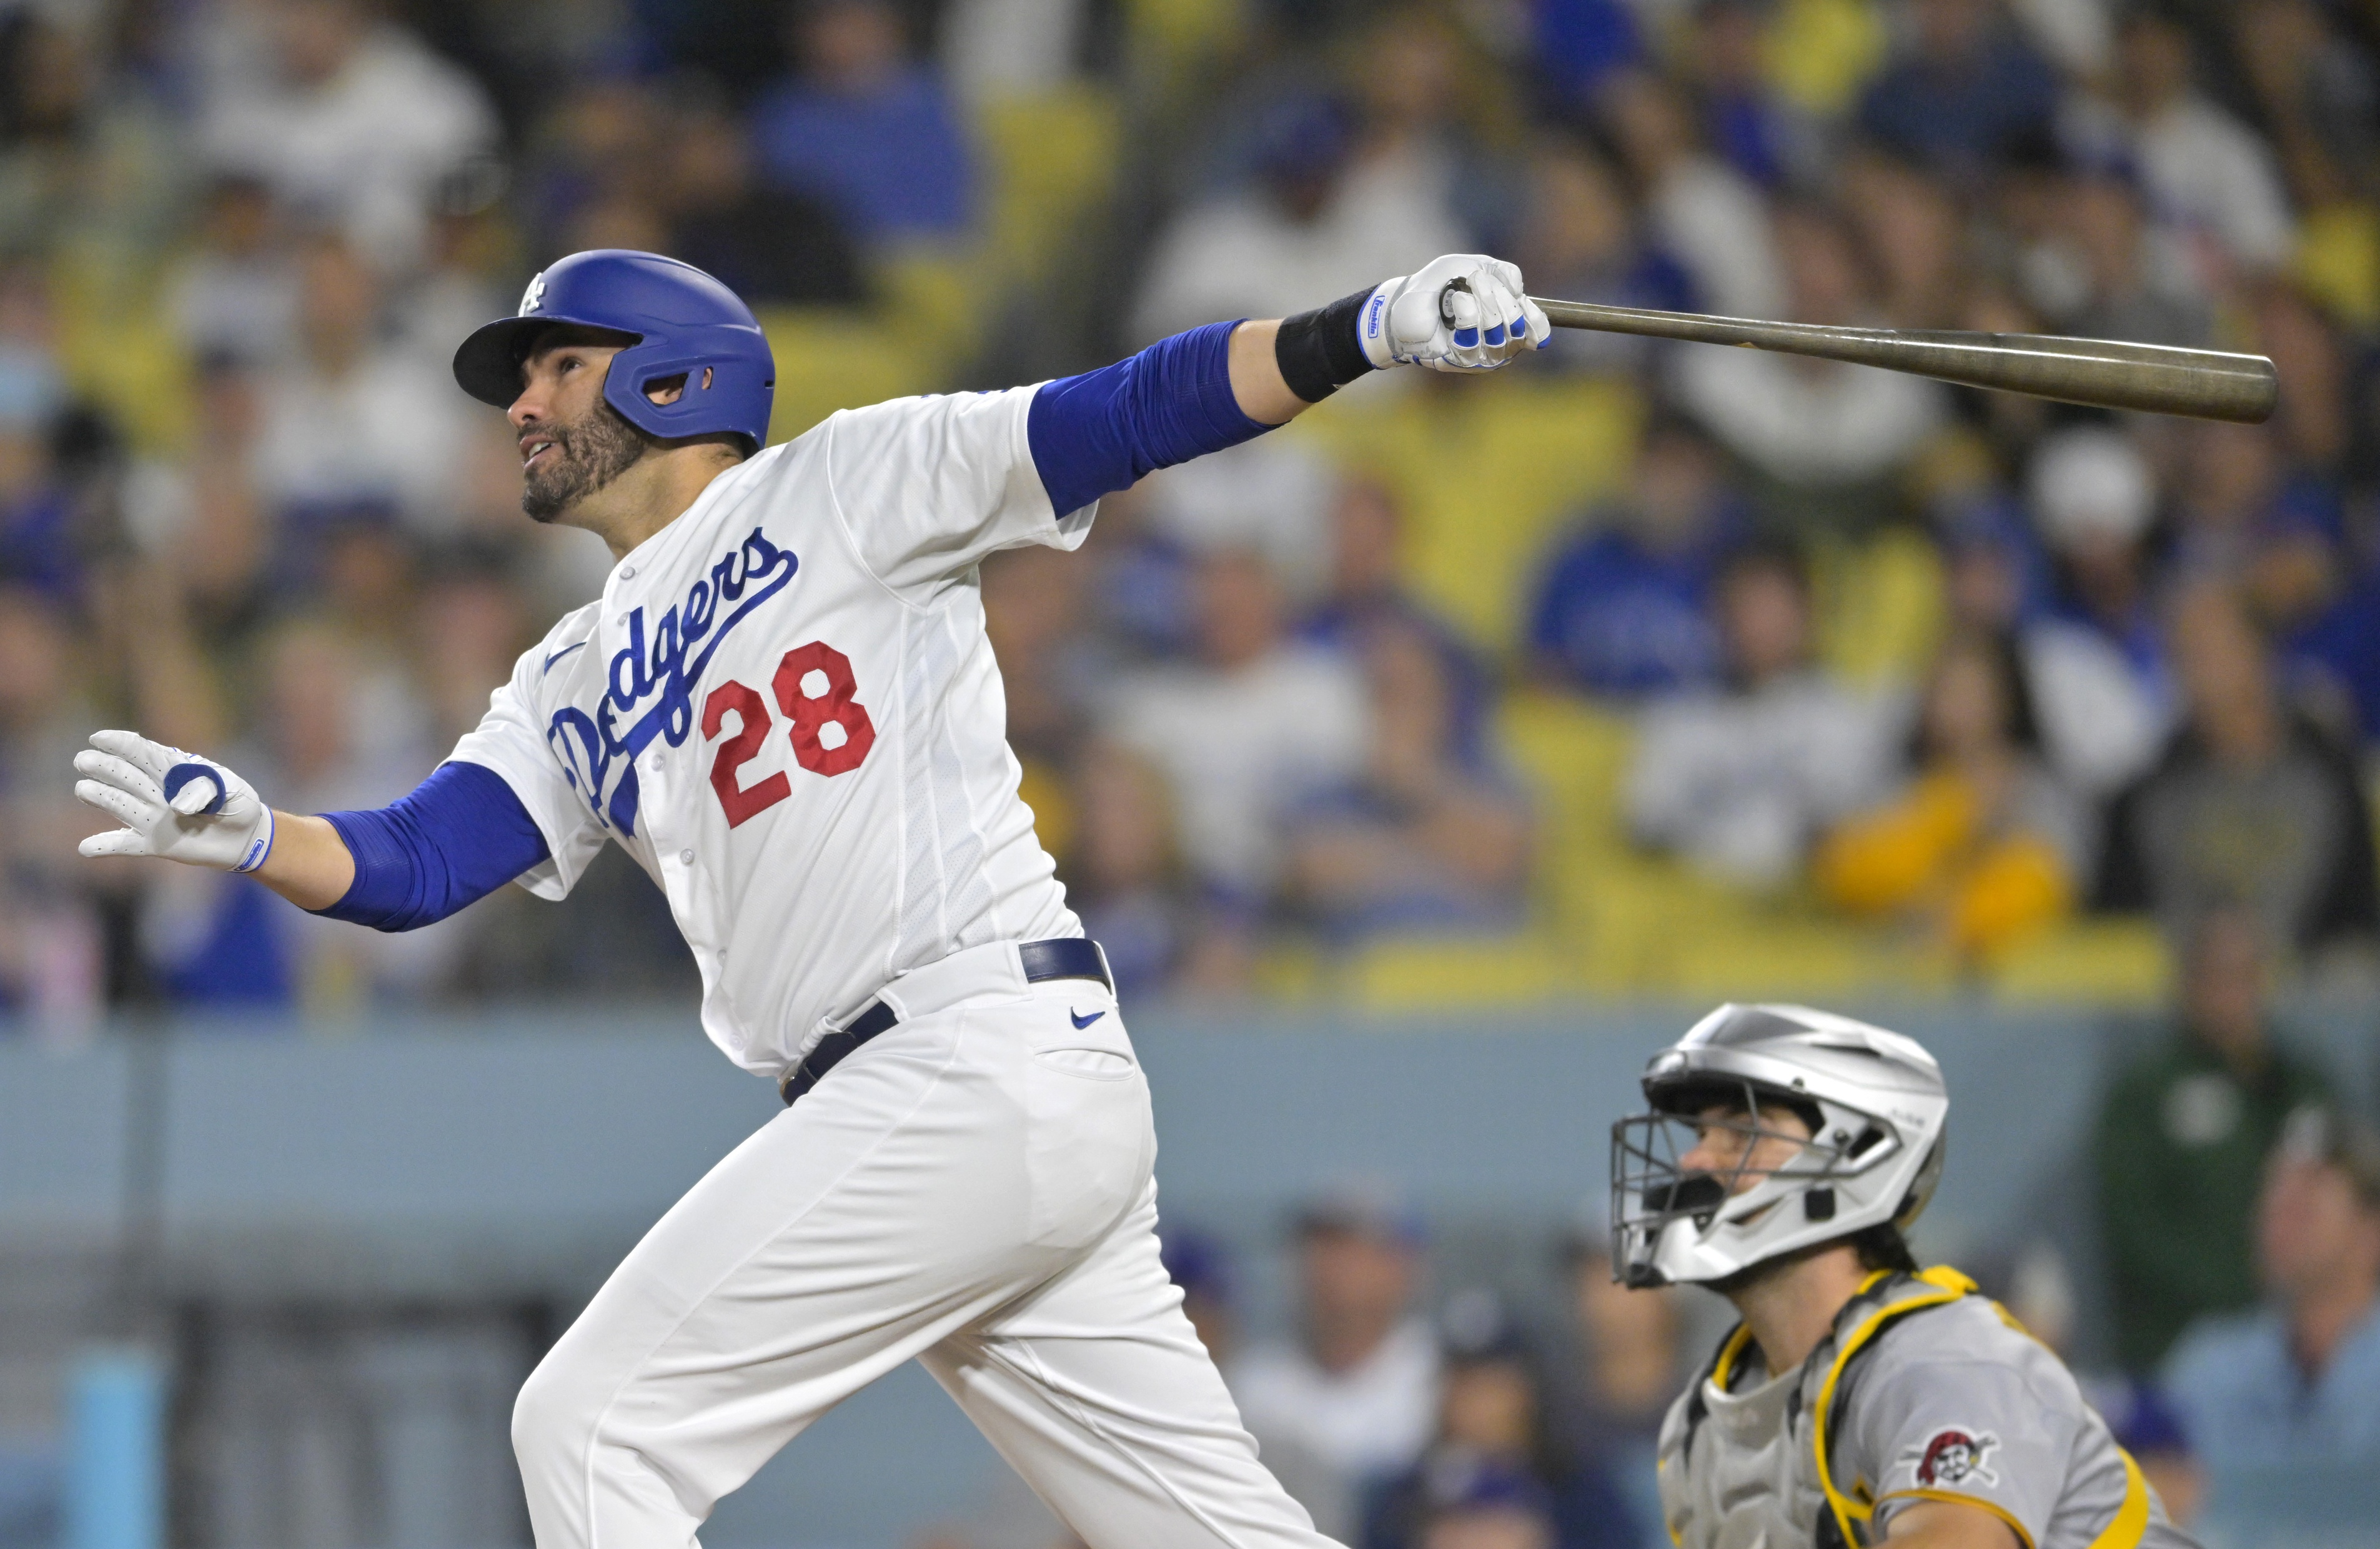 Are the L.A. Dodgers unbeatable? - The Washington Post